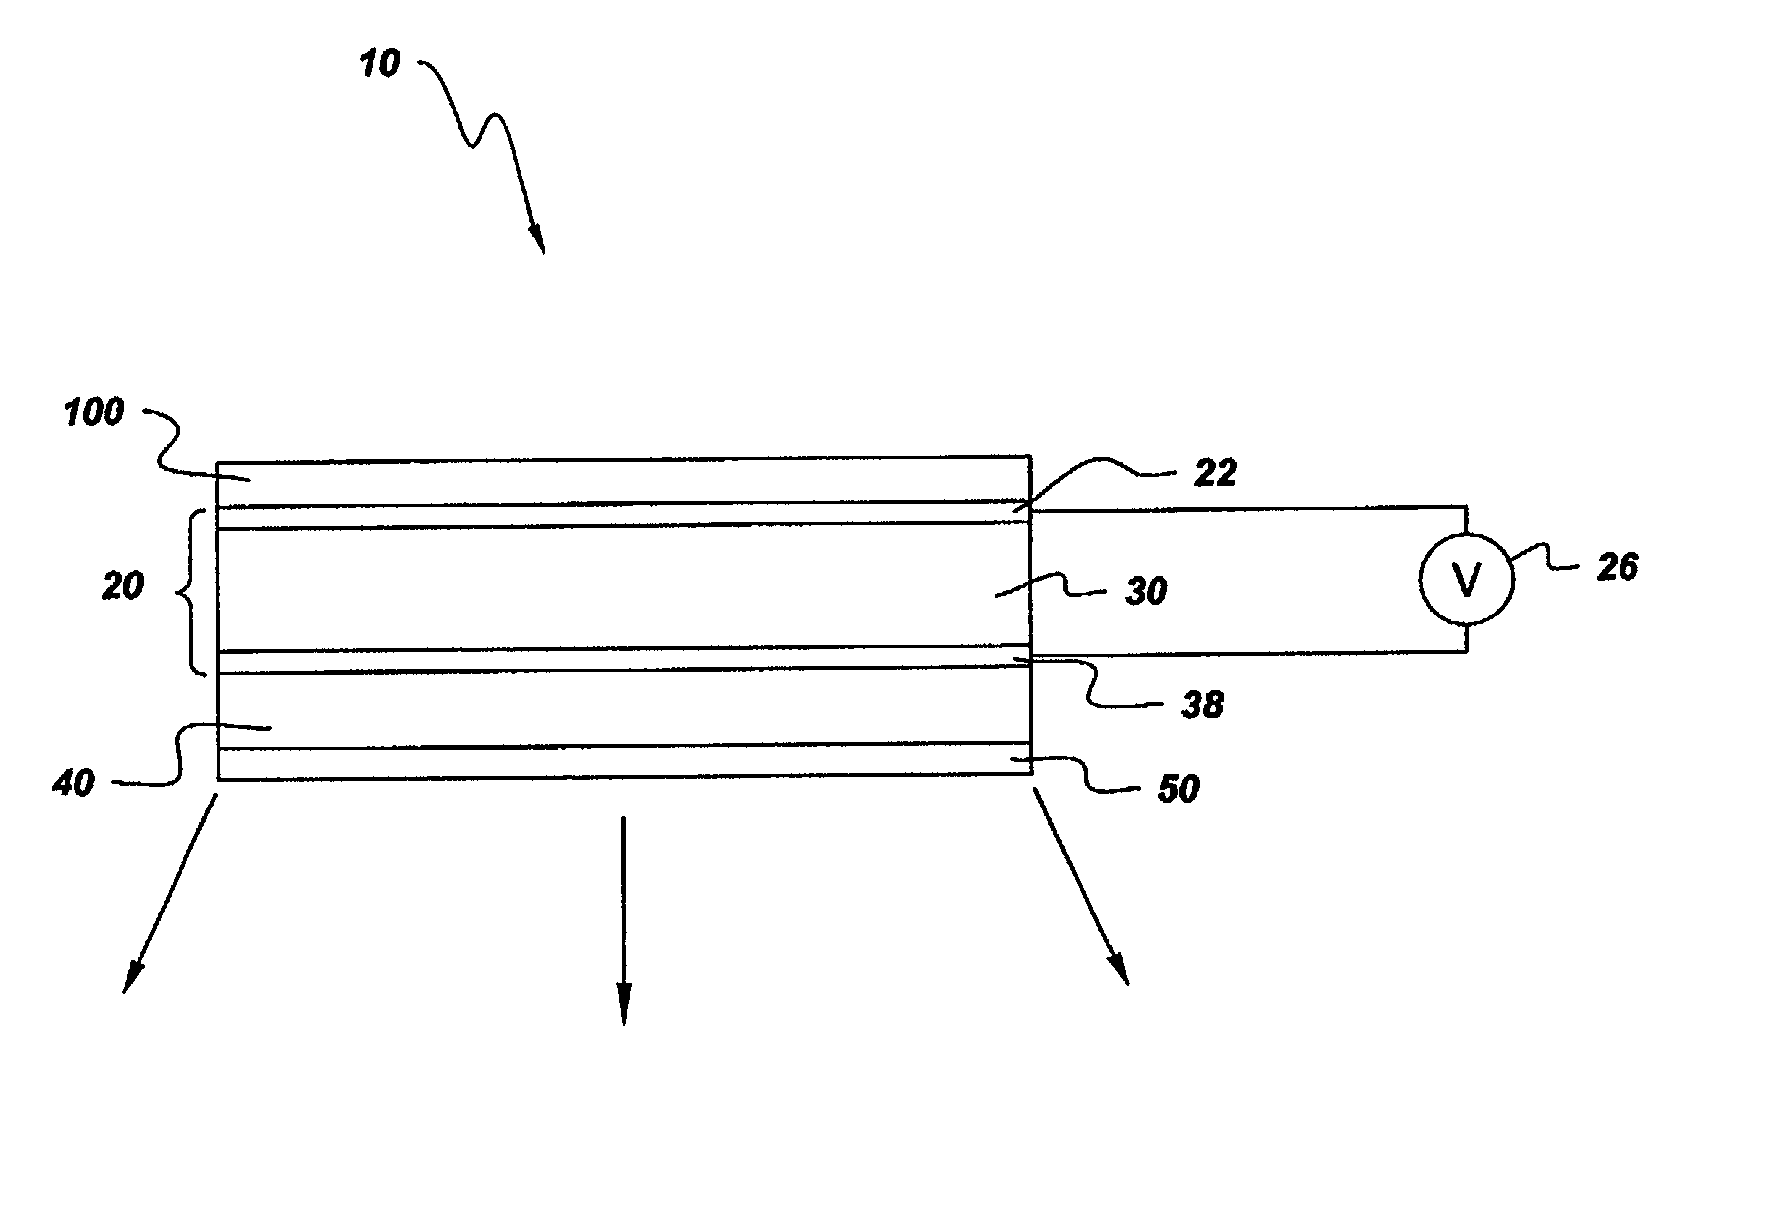 Light-emitting device with organic electroluminescent material and photoluminescent materials